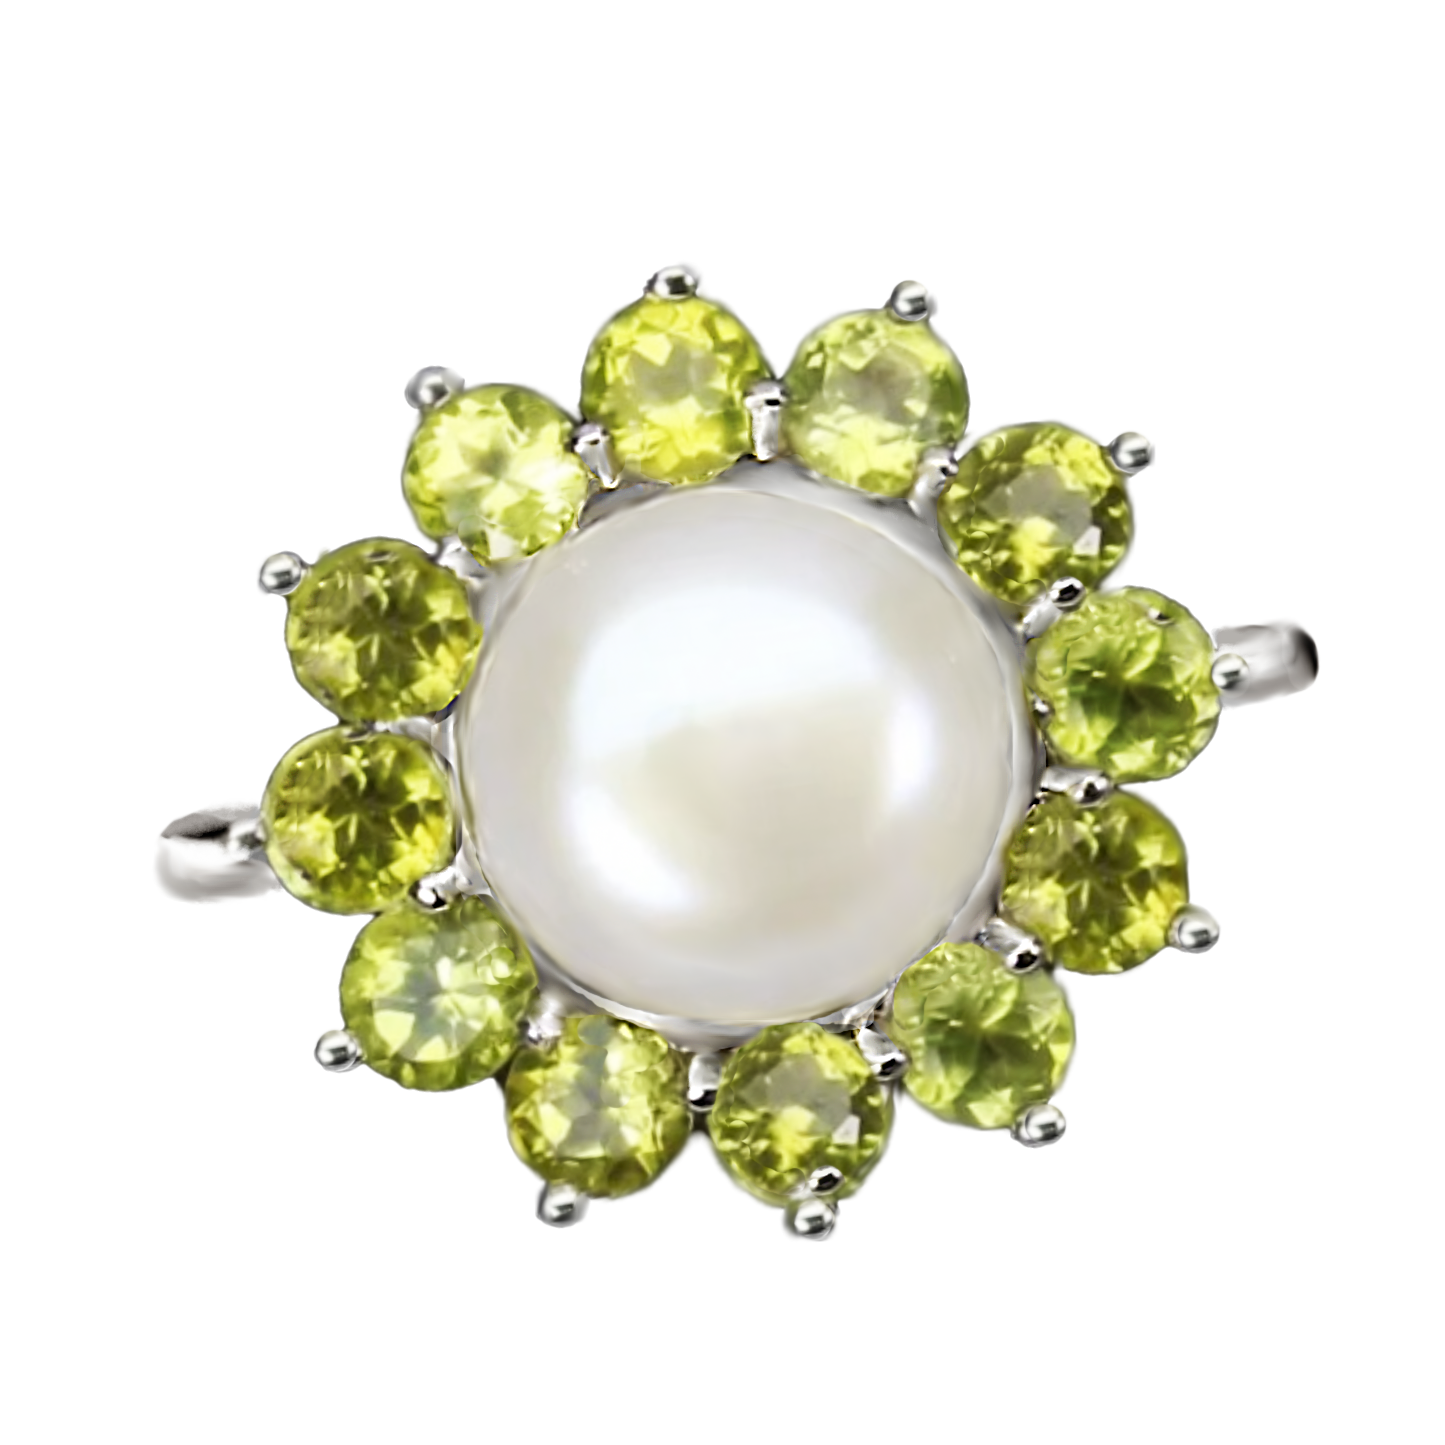 Natural Unheated Peridot, White Pearl Gemstone Solid .925 Sterling Silver Ring Size 8 or Q